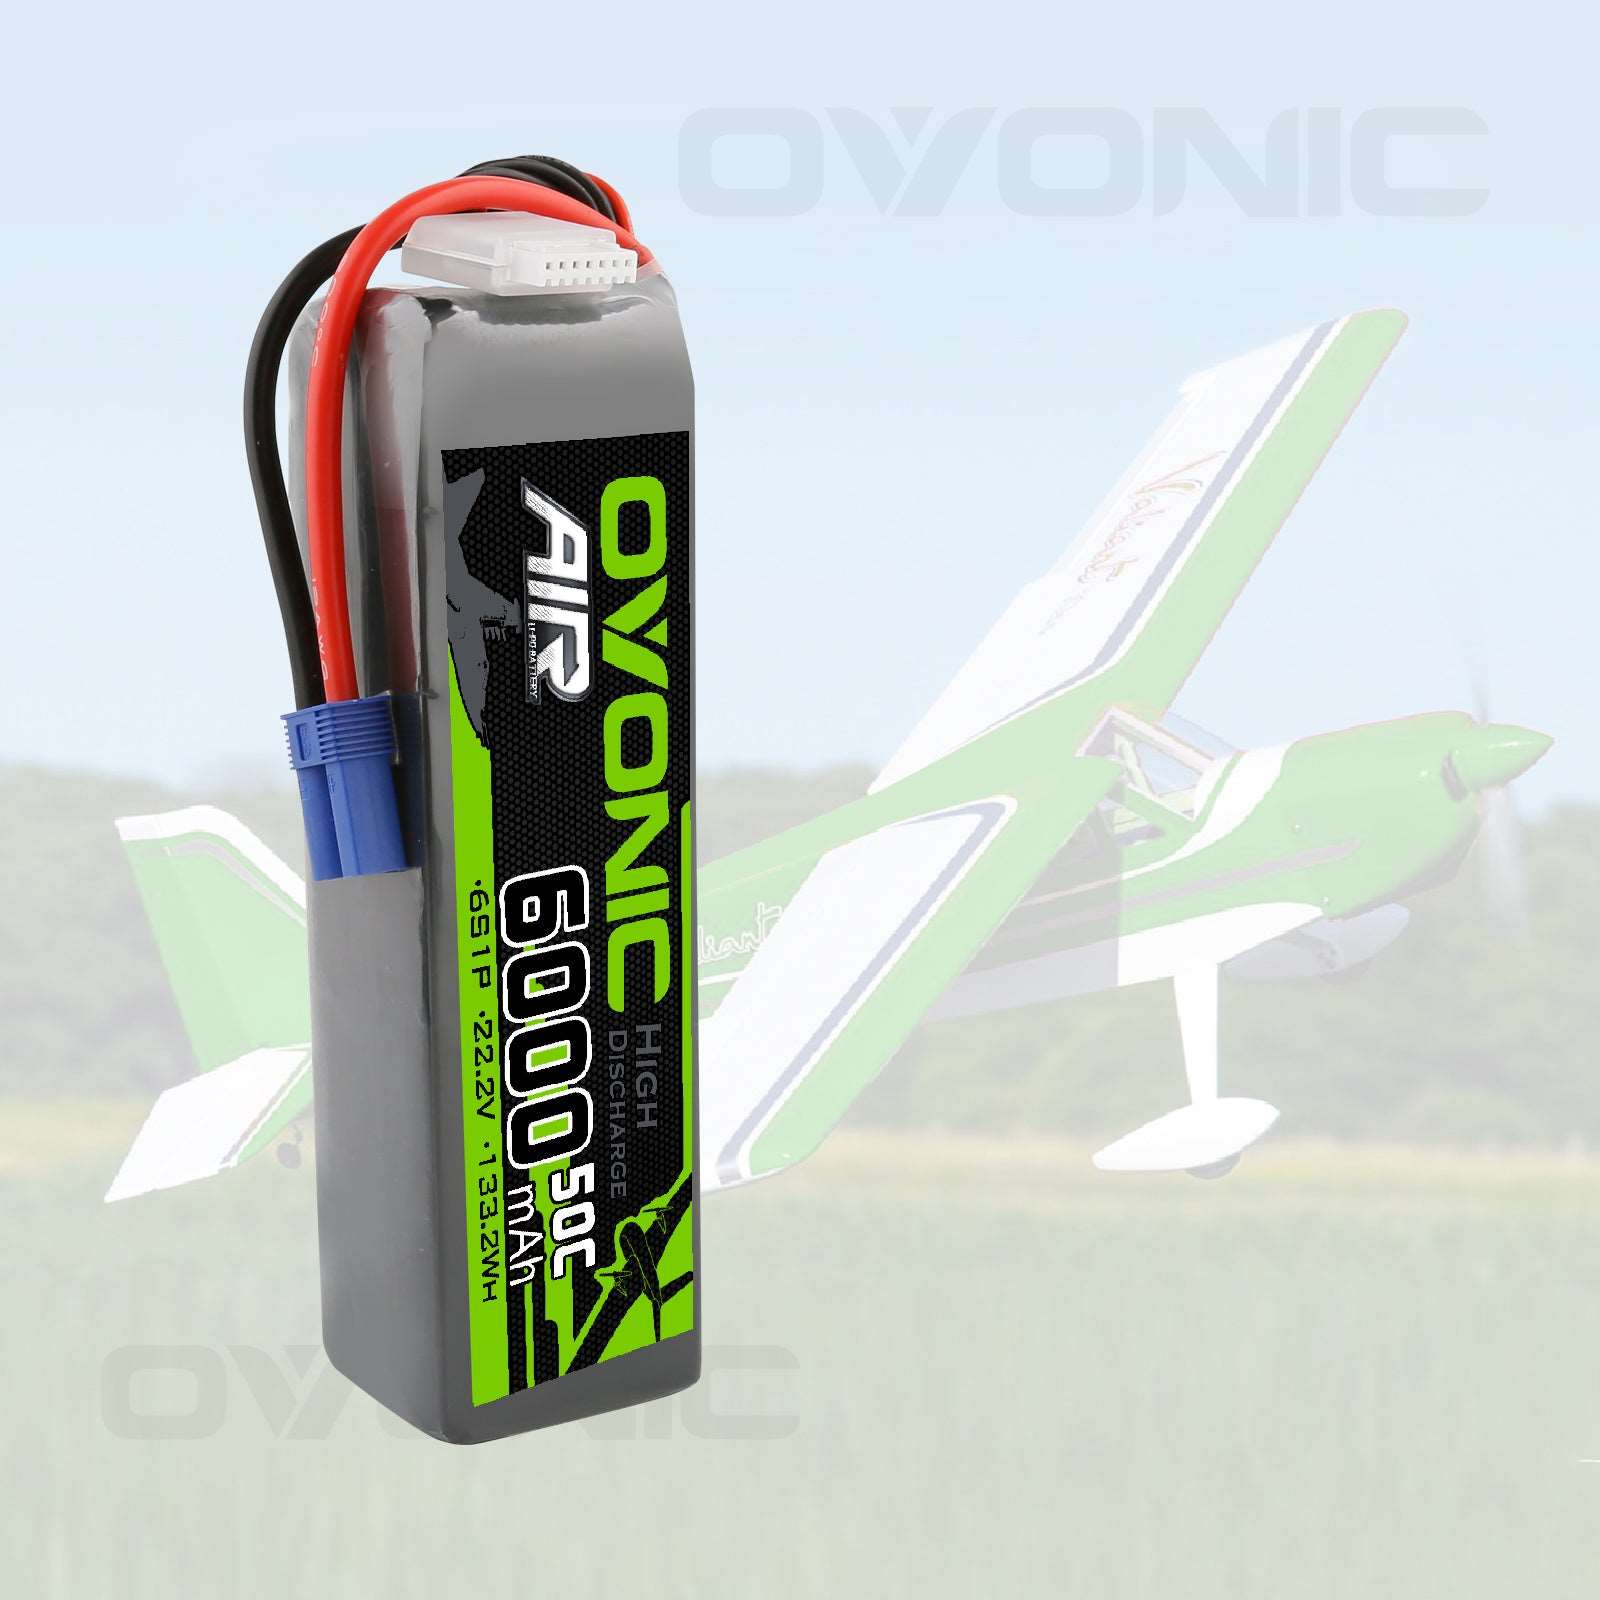 Ovonic 6000mah 6S 22.2V 50C Lipo Battery Pack with EC5 Plug for Airplane&Heli Car - Ampow